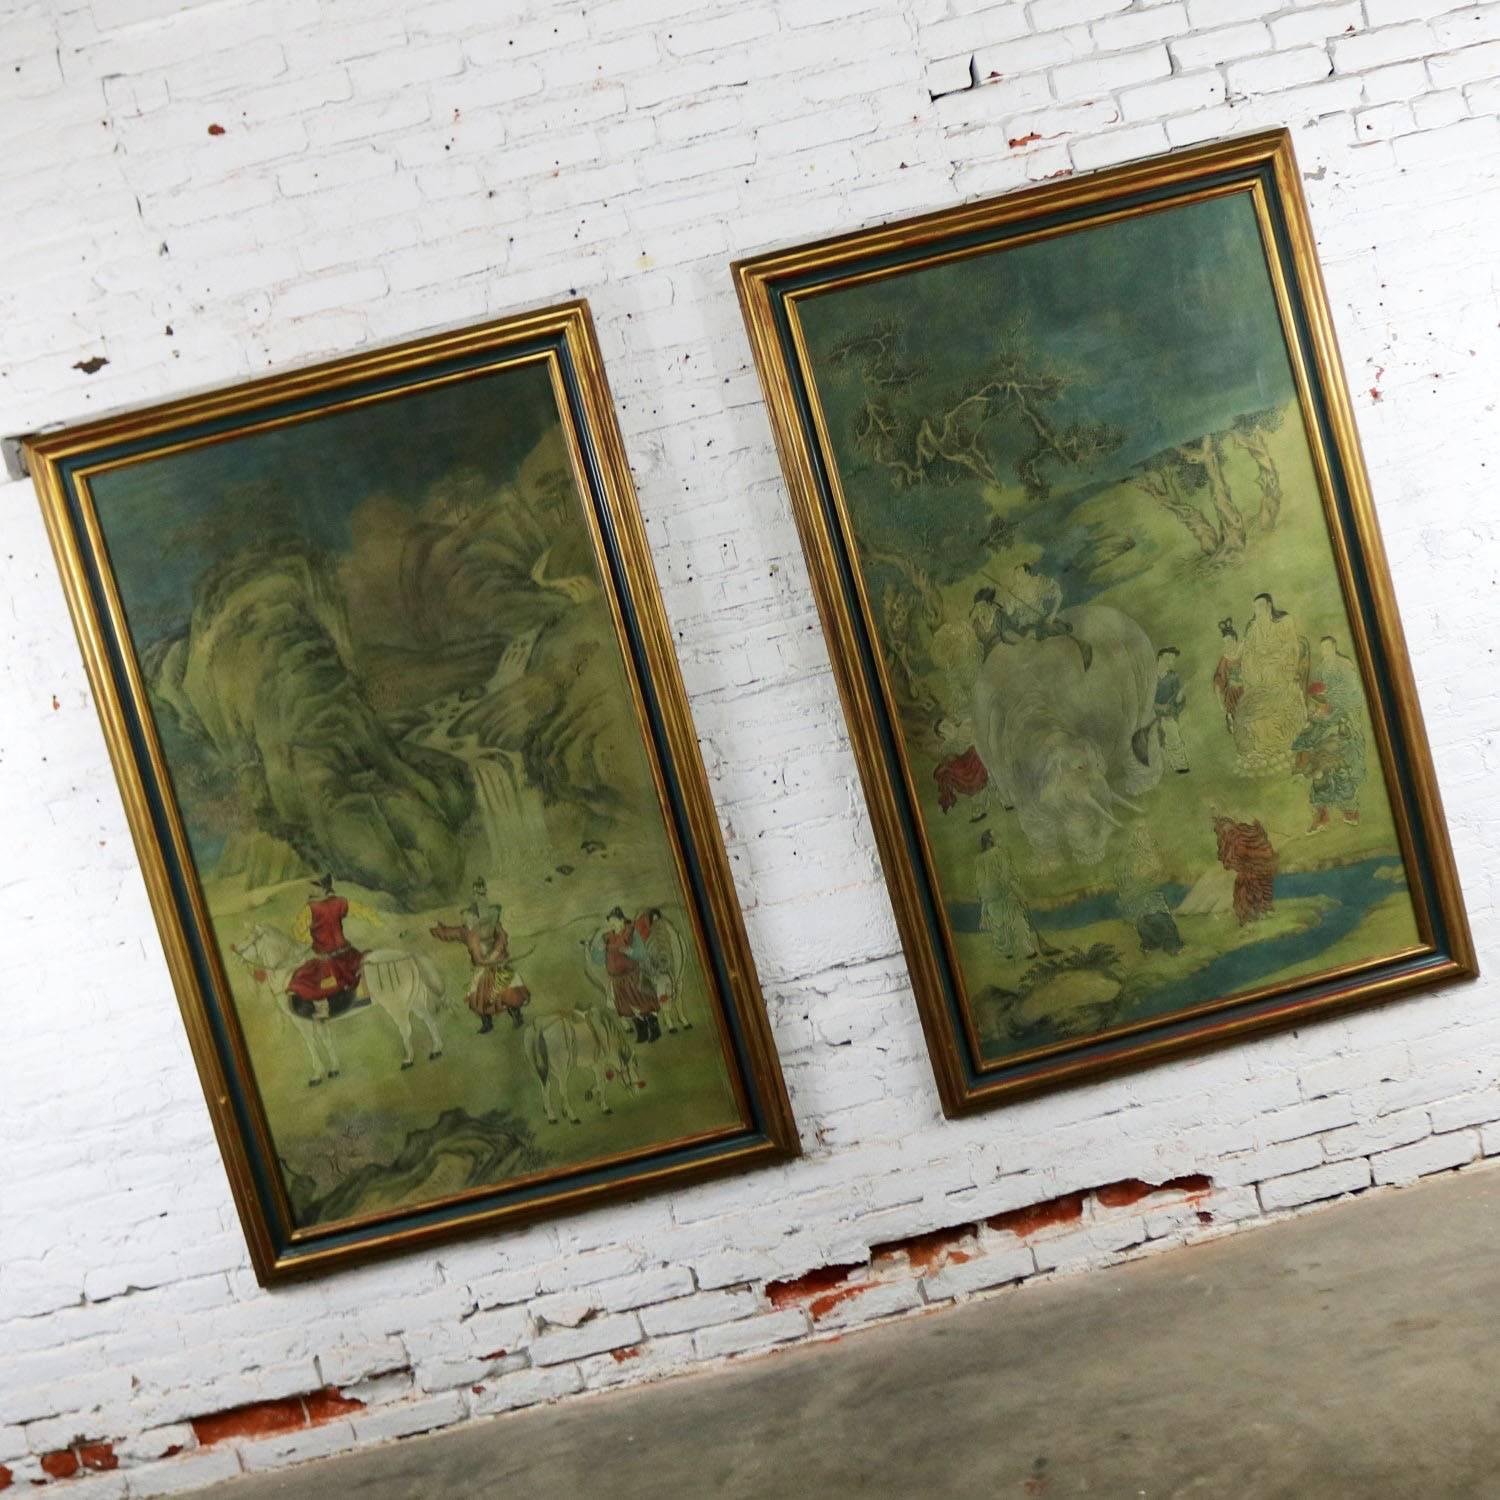 Gorgeous pair of monumental sized Chinese art. Ink and color on paper depicting landscape and figural scenes. This unsigned pair are mounted on hardboard and framed under glass. They are in wonderful vintage condition. We believe the frames to be